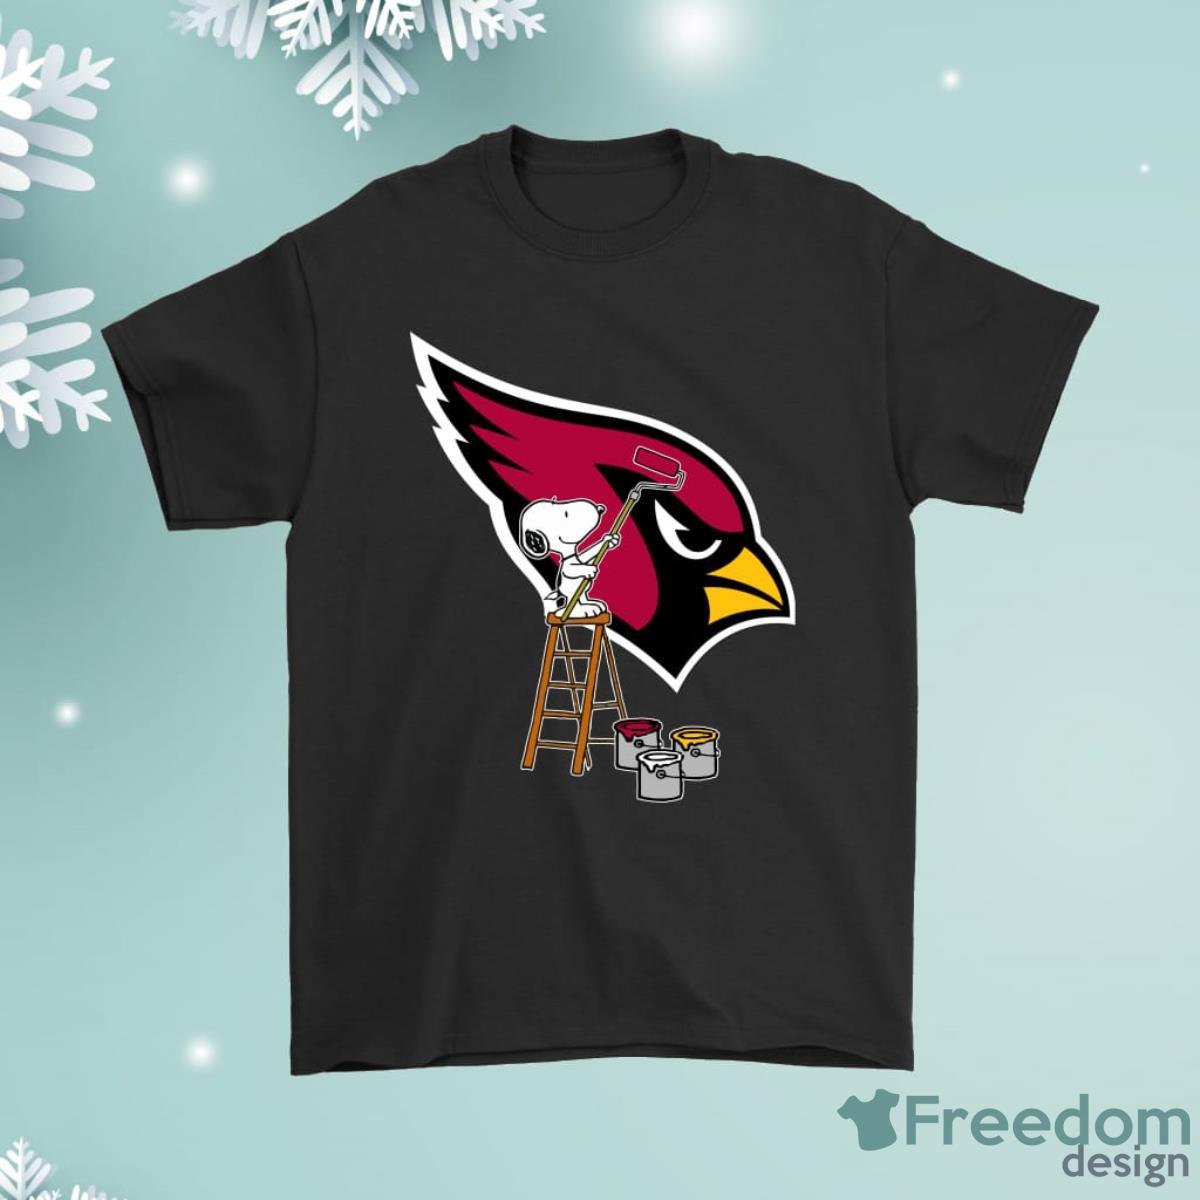 Snoopy The Peanuts Cheer For The Arizona Cardinals T-Shirt - T